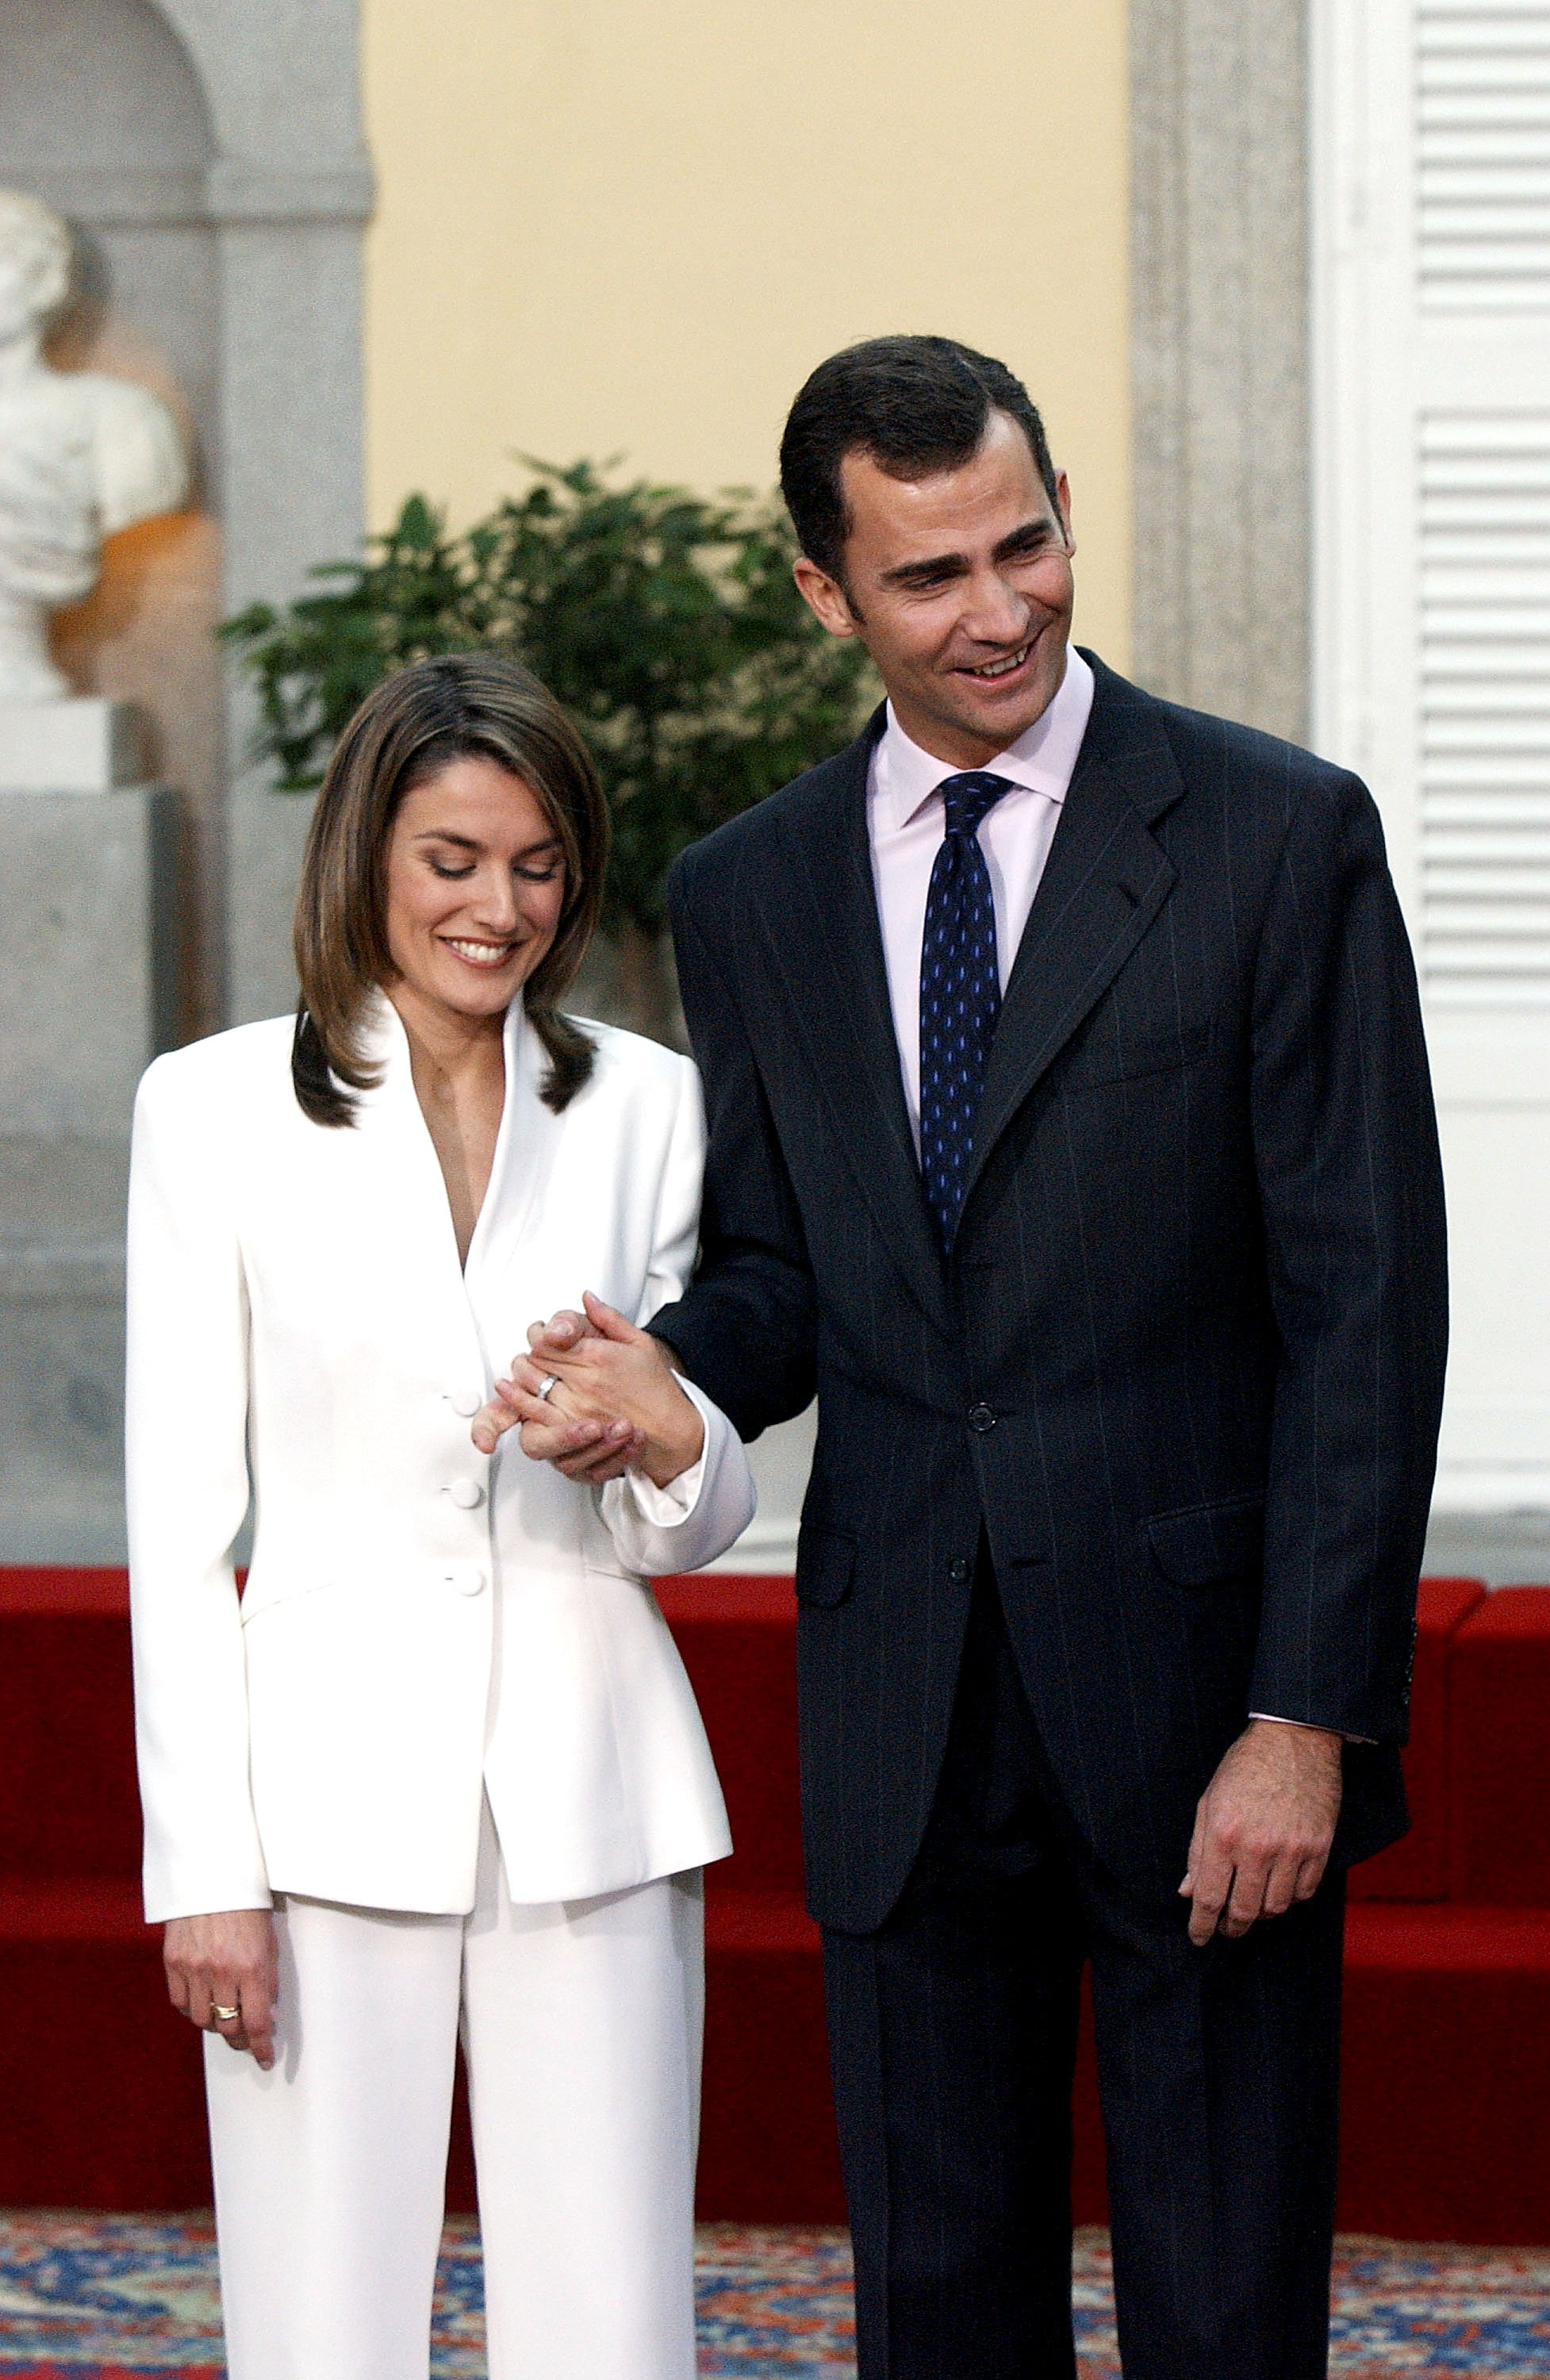 Crown Prince Felipe and Letizia Ortiz posing during an official engagement ceremony at the garden of El Pardo Palace on November 6, 2003 at Palacio del Pardo in Madrid, Spain. / Source: Getty Images